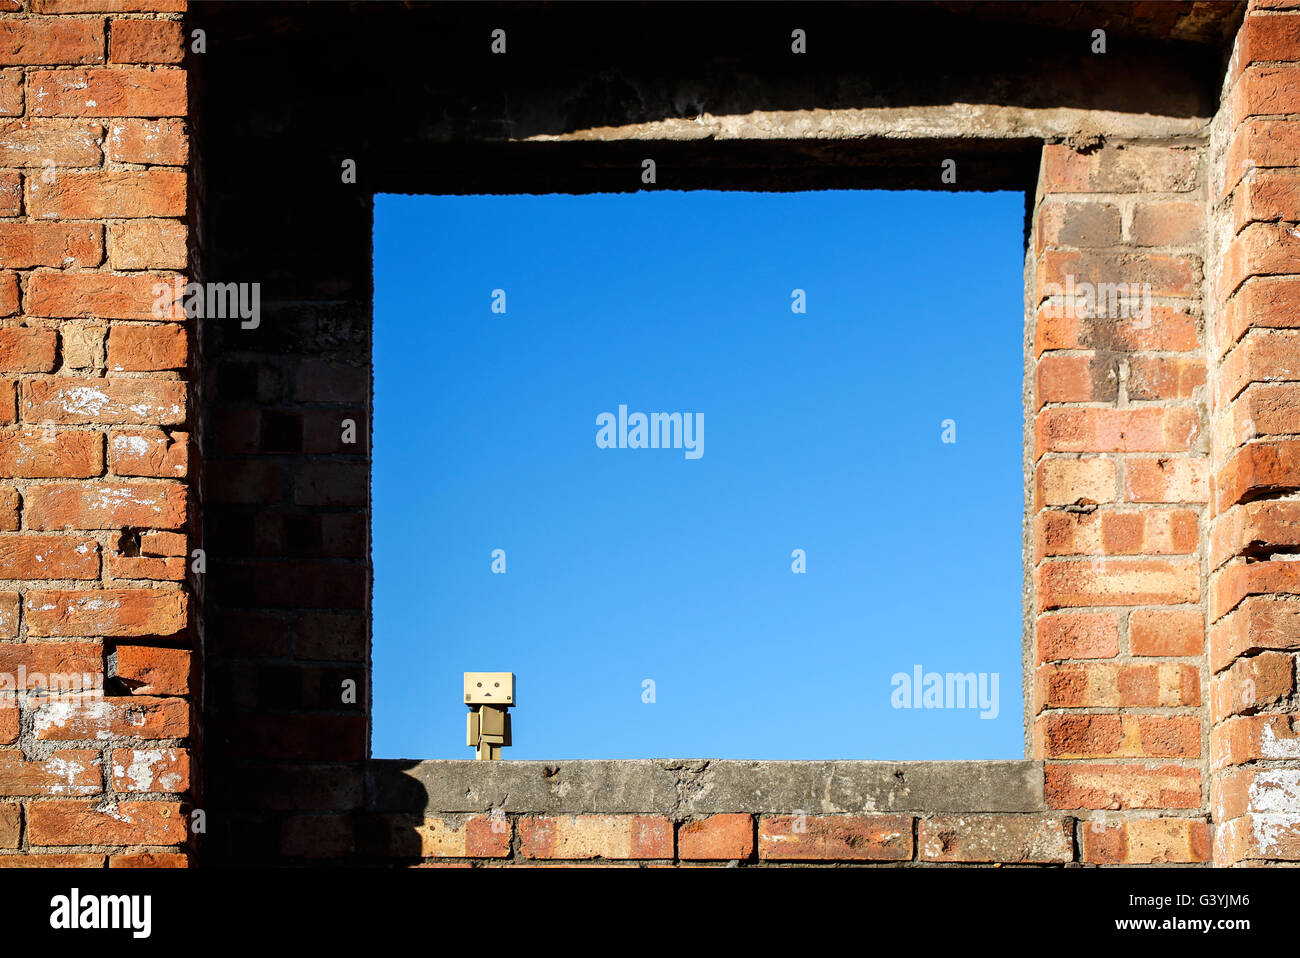 A Danbo Danboard fictional Robot Character framed against a blue sky in an empty window in an abandoned building Stock Photo